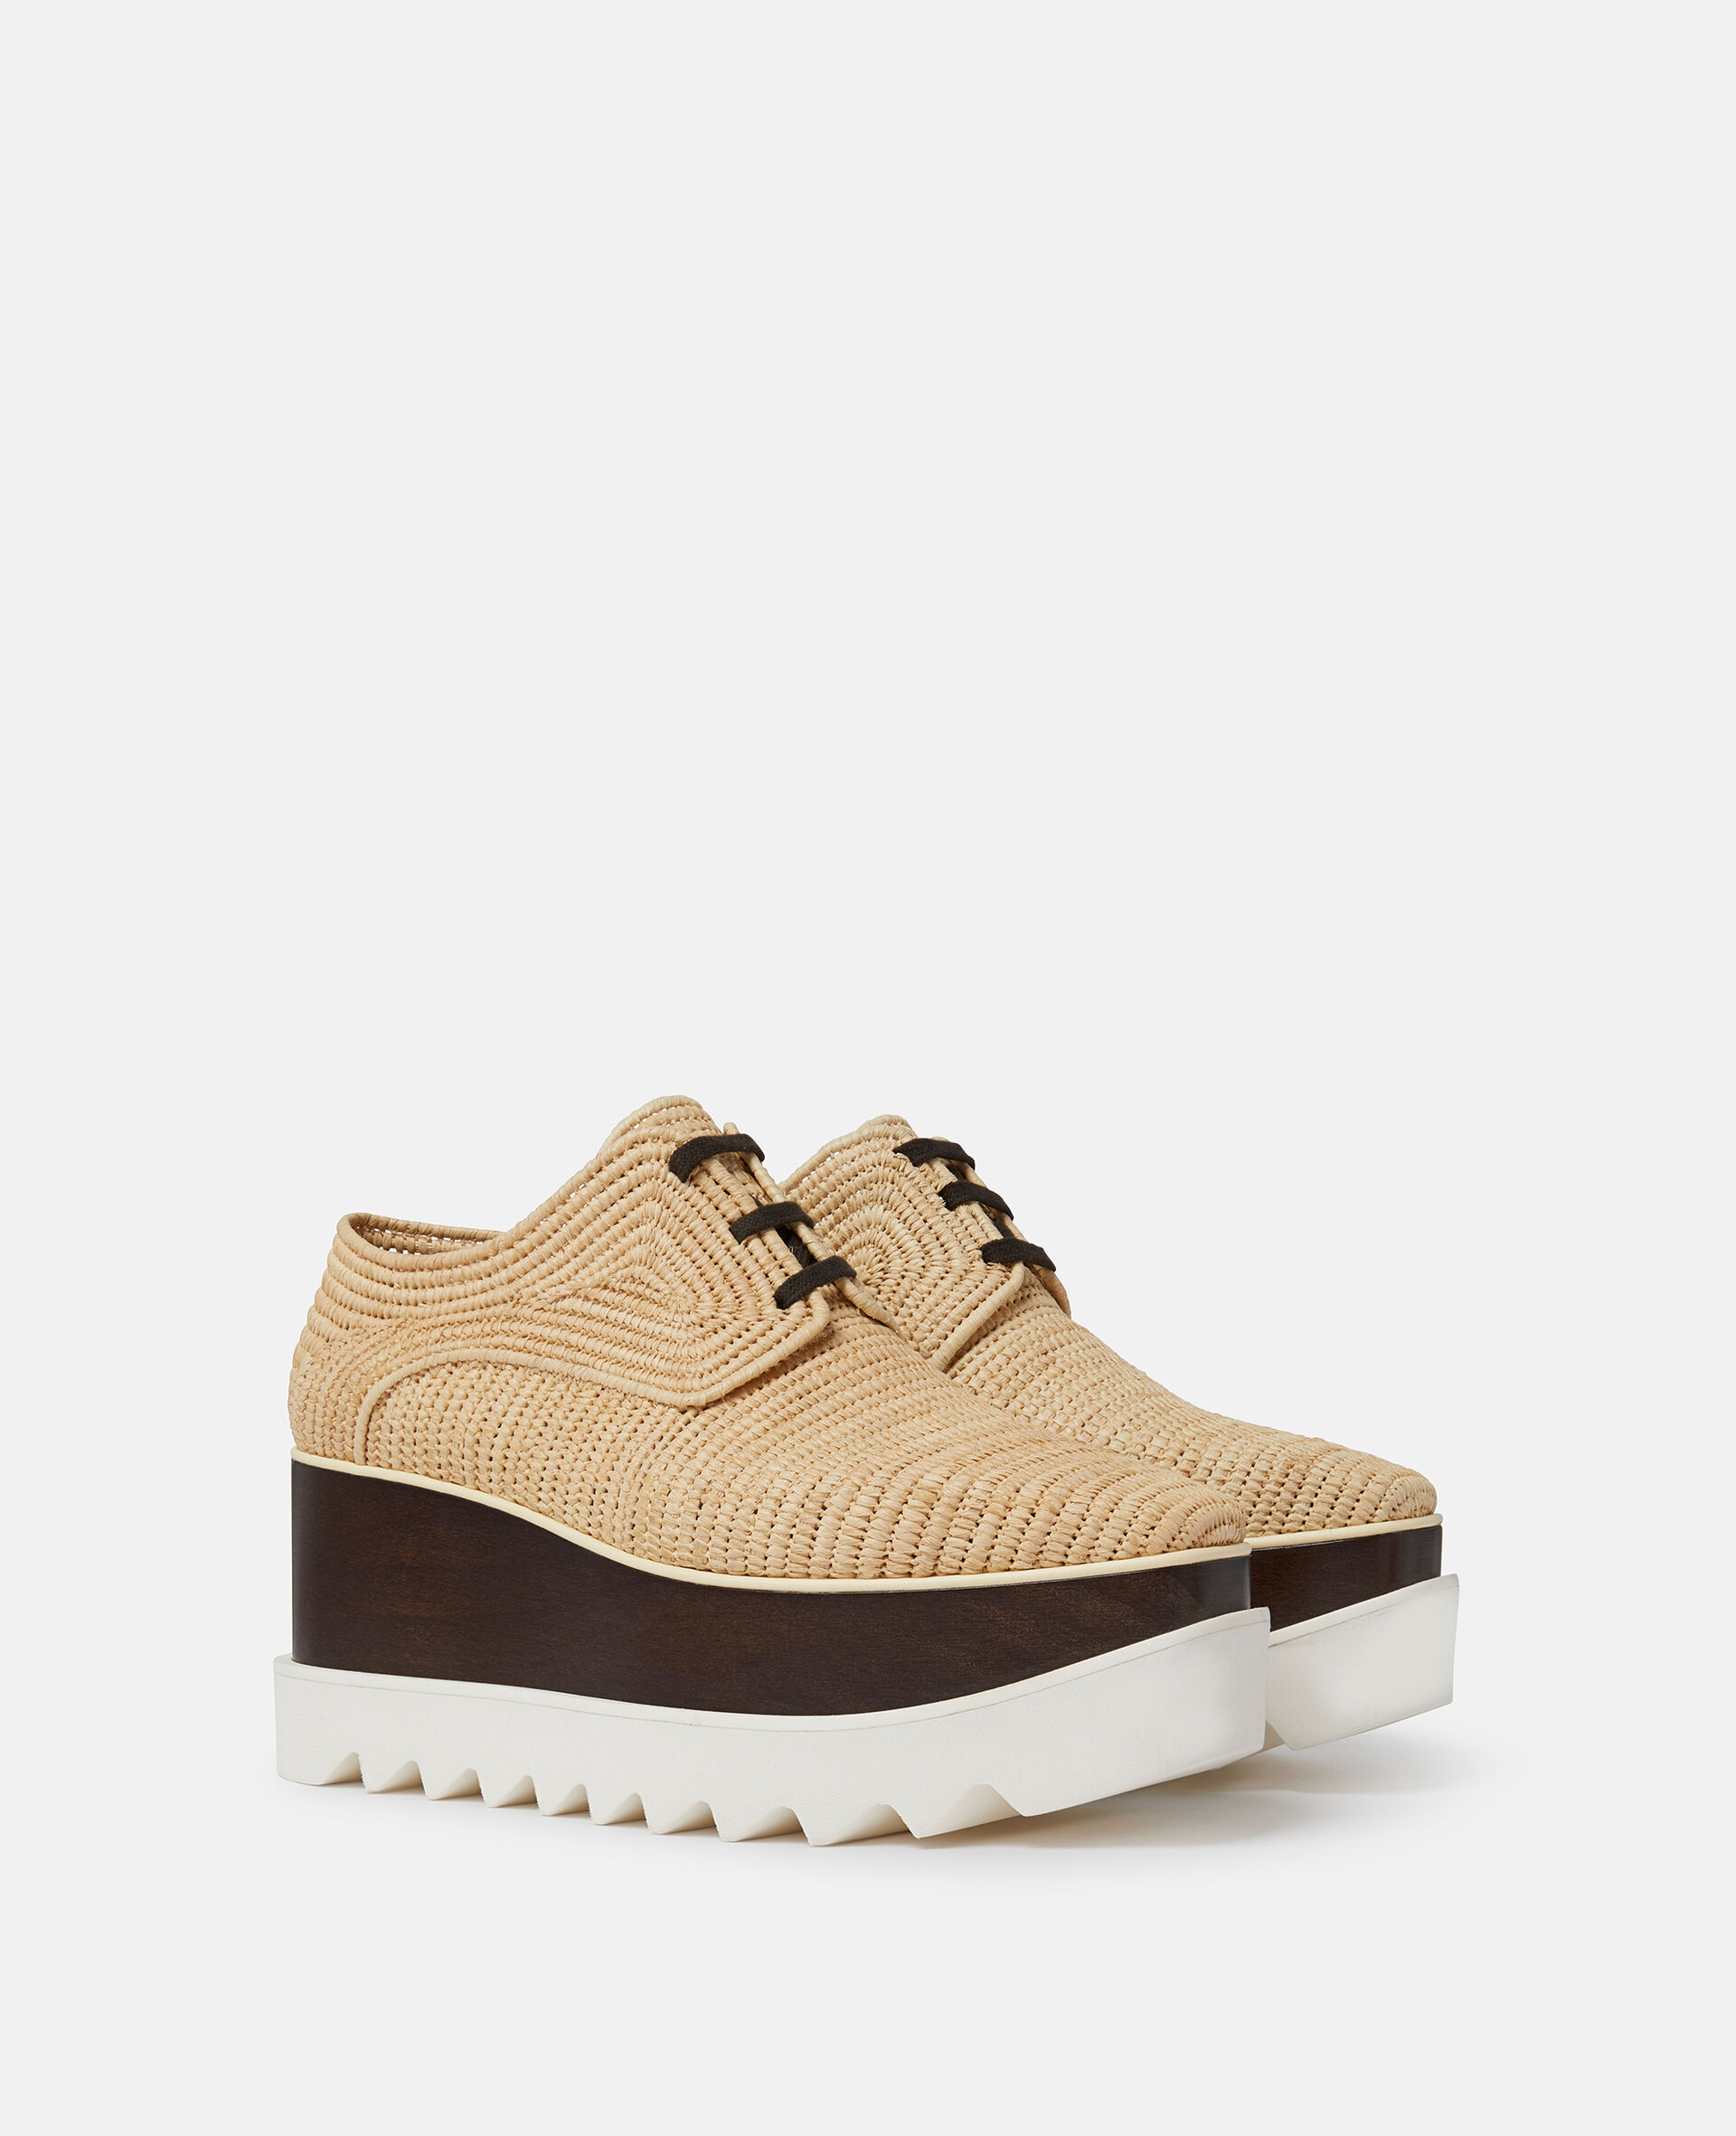 Fashion Trend Guide: The Look for Less - Stella McCartney Elyse Platform  Oxford Dupes